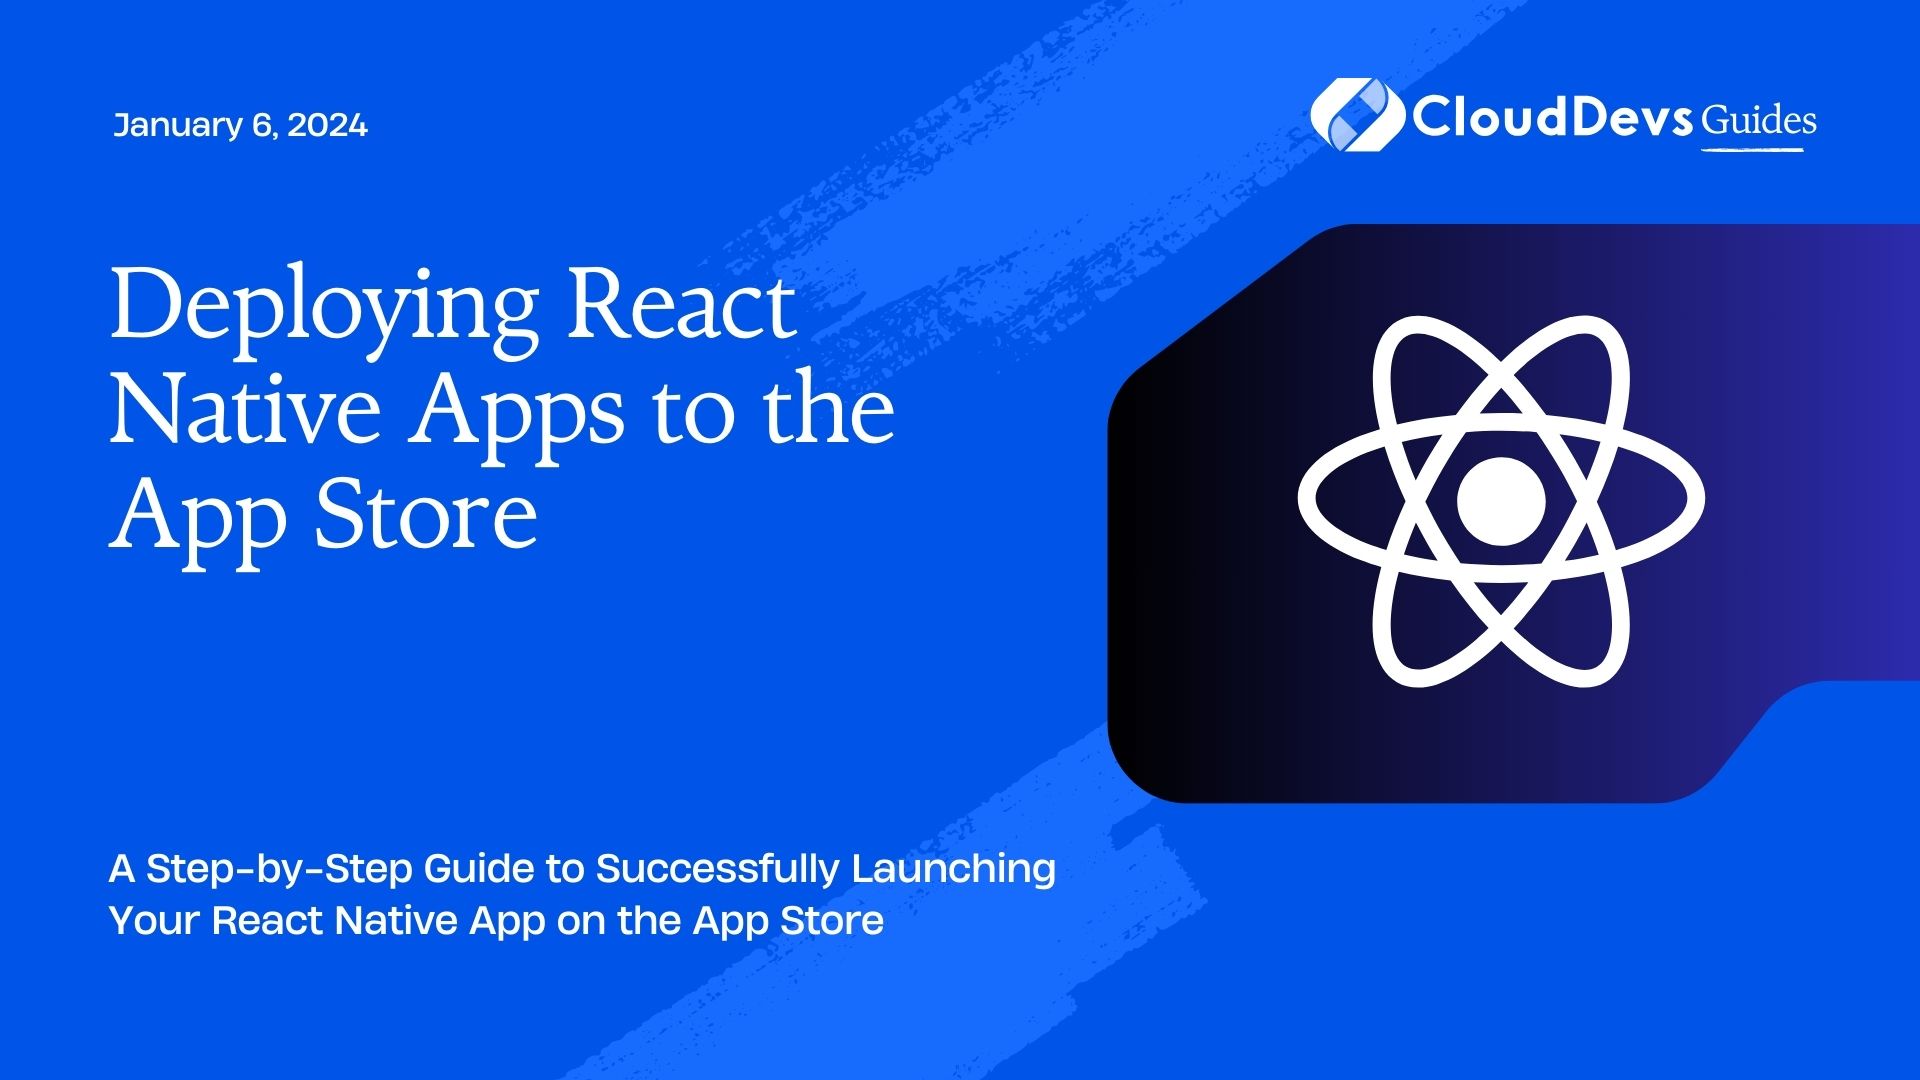 Deploying React Native Apps to the App Store